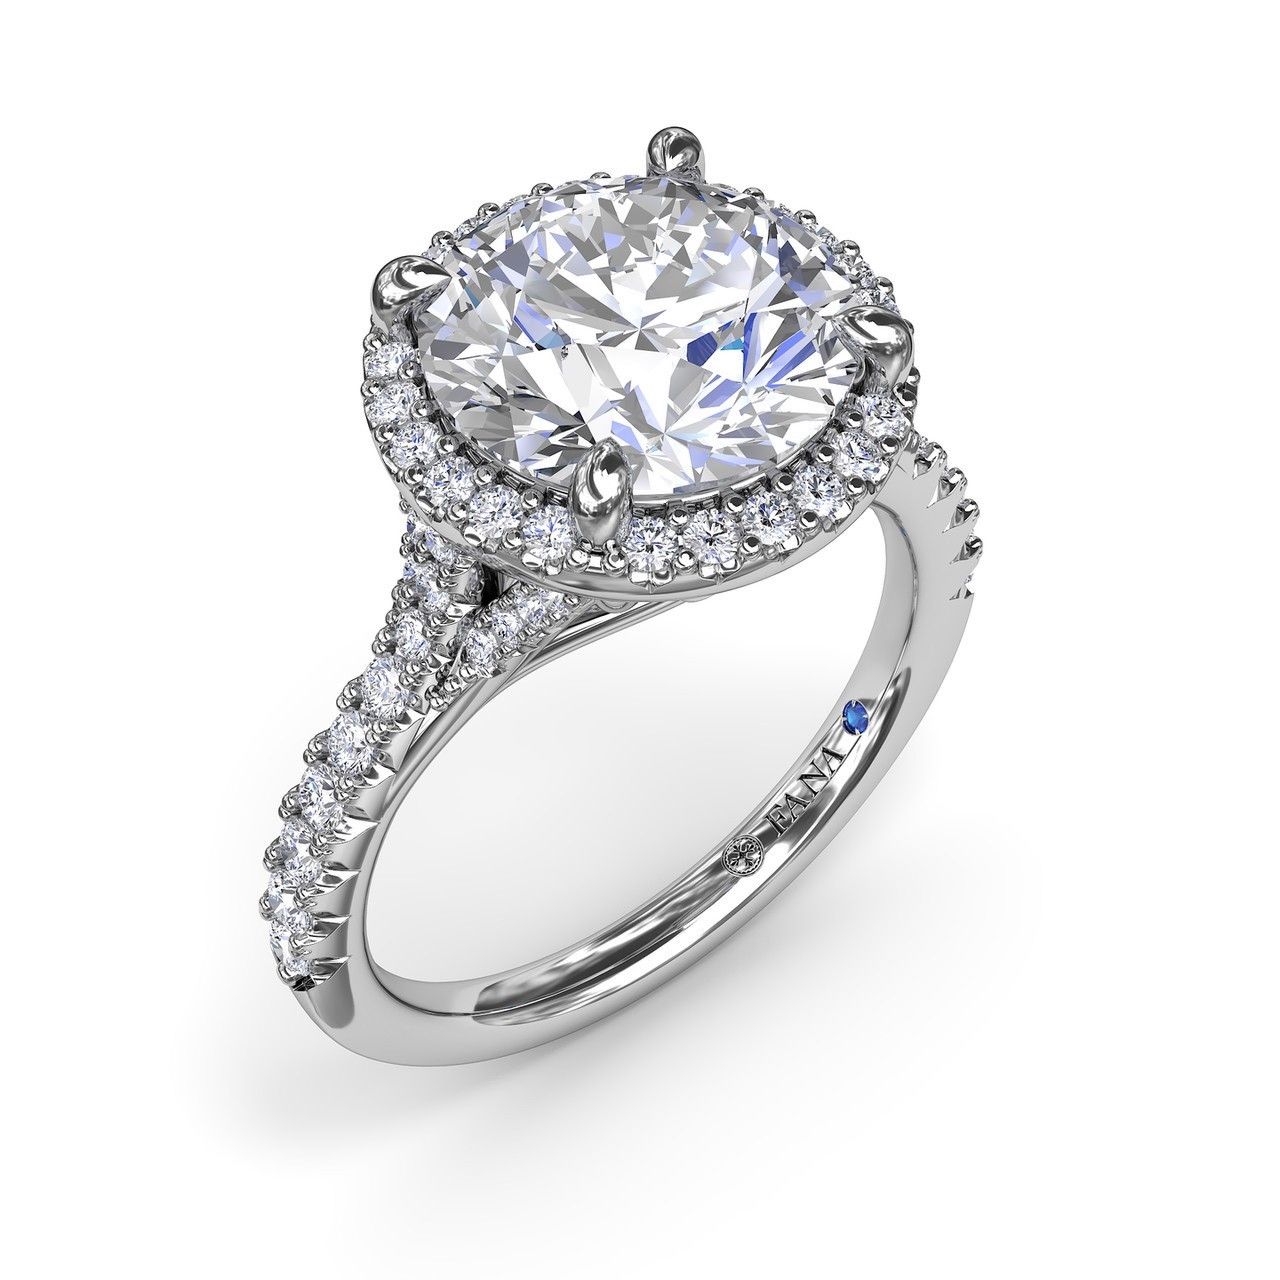 14K WHITE GOLD HALO SEMI-MOUNT RING SIZE 6.5 WITH 60=0.50TW ROUND G-H VS2-SI1 DIAMONDS AND ONE ROUND BLUE SAPPHIRE (5.06 GRAMS)